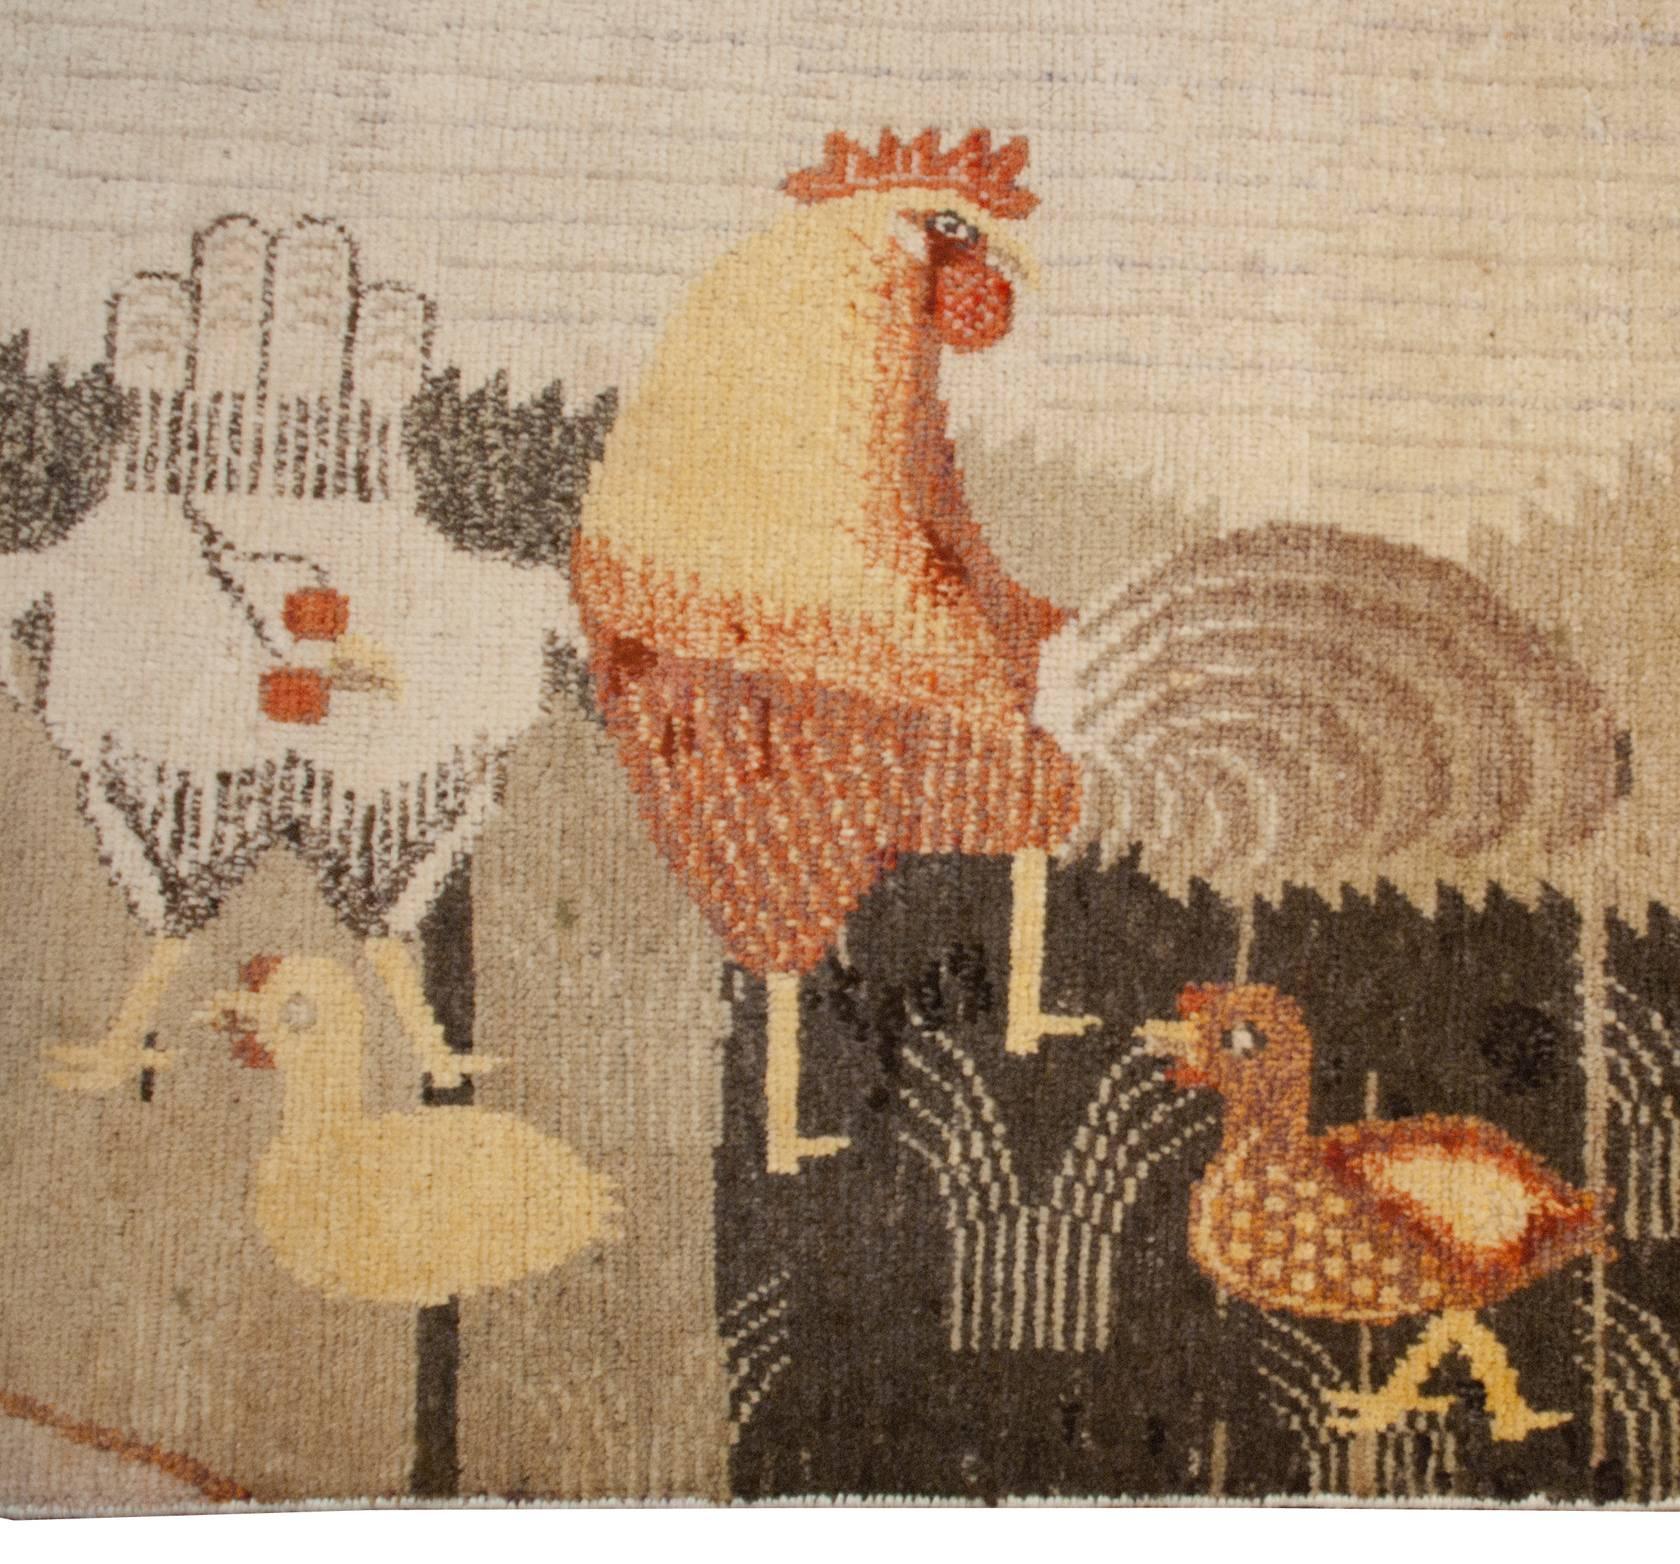 A wonderfully whimsical mid-20th century central Asian pictorial Khotan rug with a bucolic scene depicting several roosters, hens, and chicks in the foreground feeding amongst the reeds at the edge of a river, with two farmhouses in the background